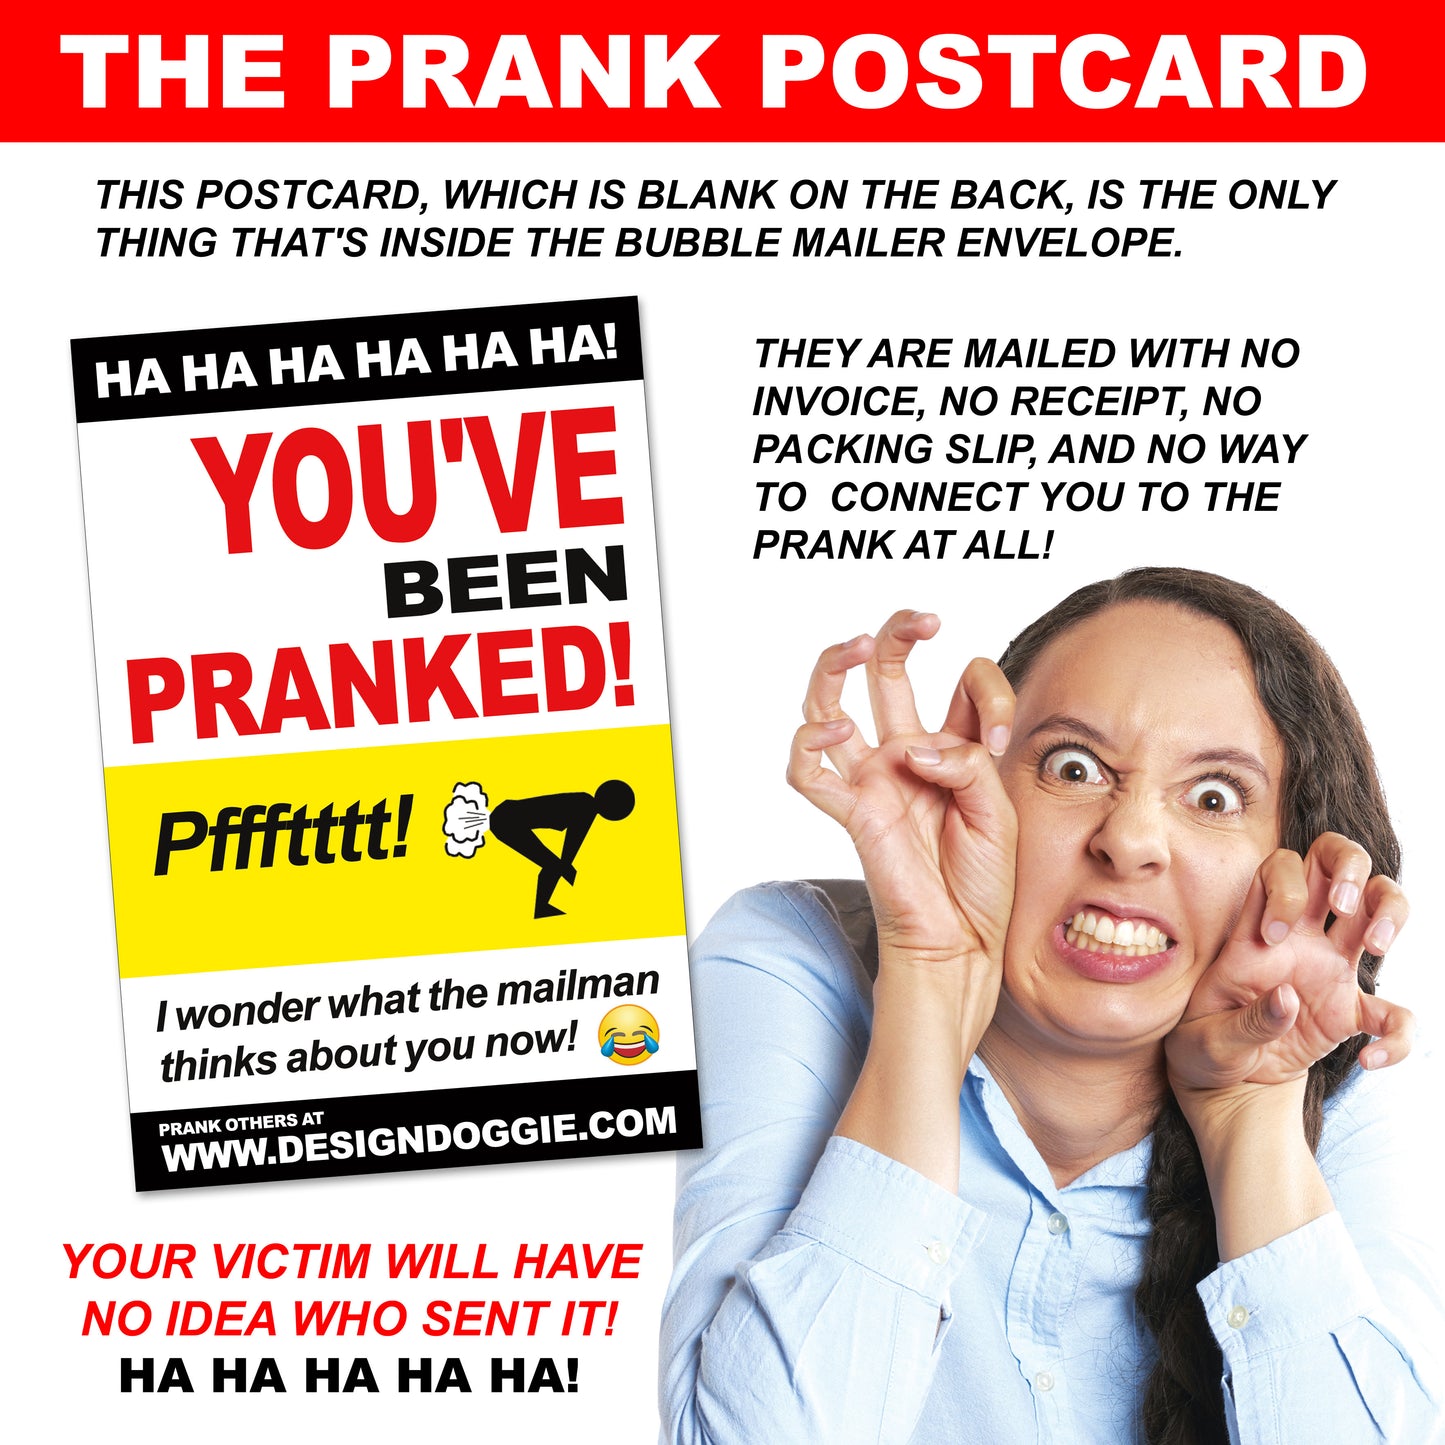 Naked Haunted Excursion embarrassing prank envelope gets mailed directly to your victims 100% anonymously!